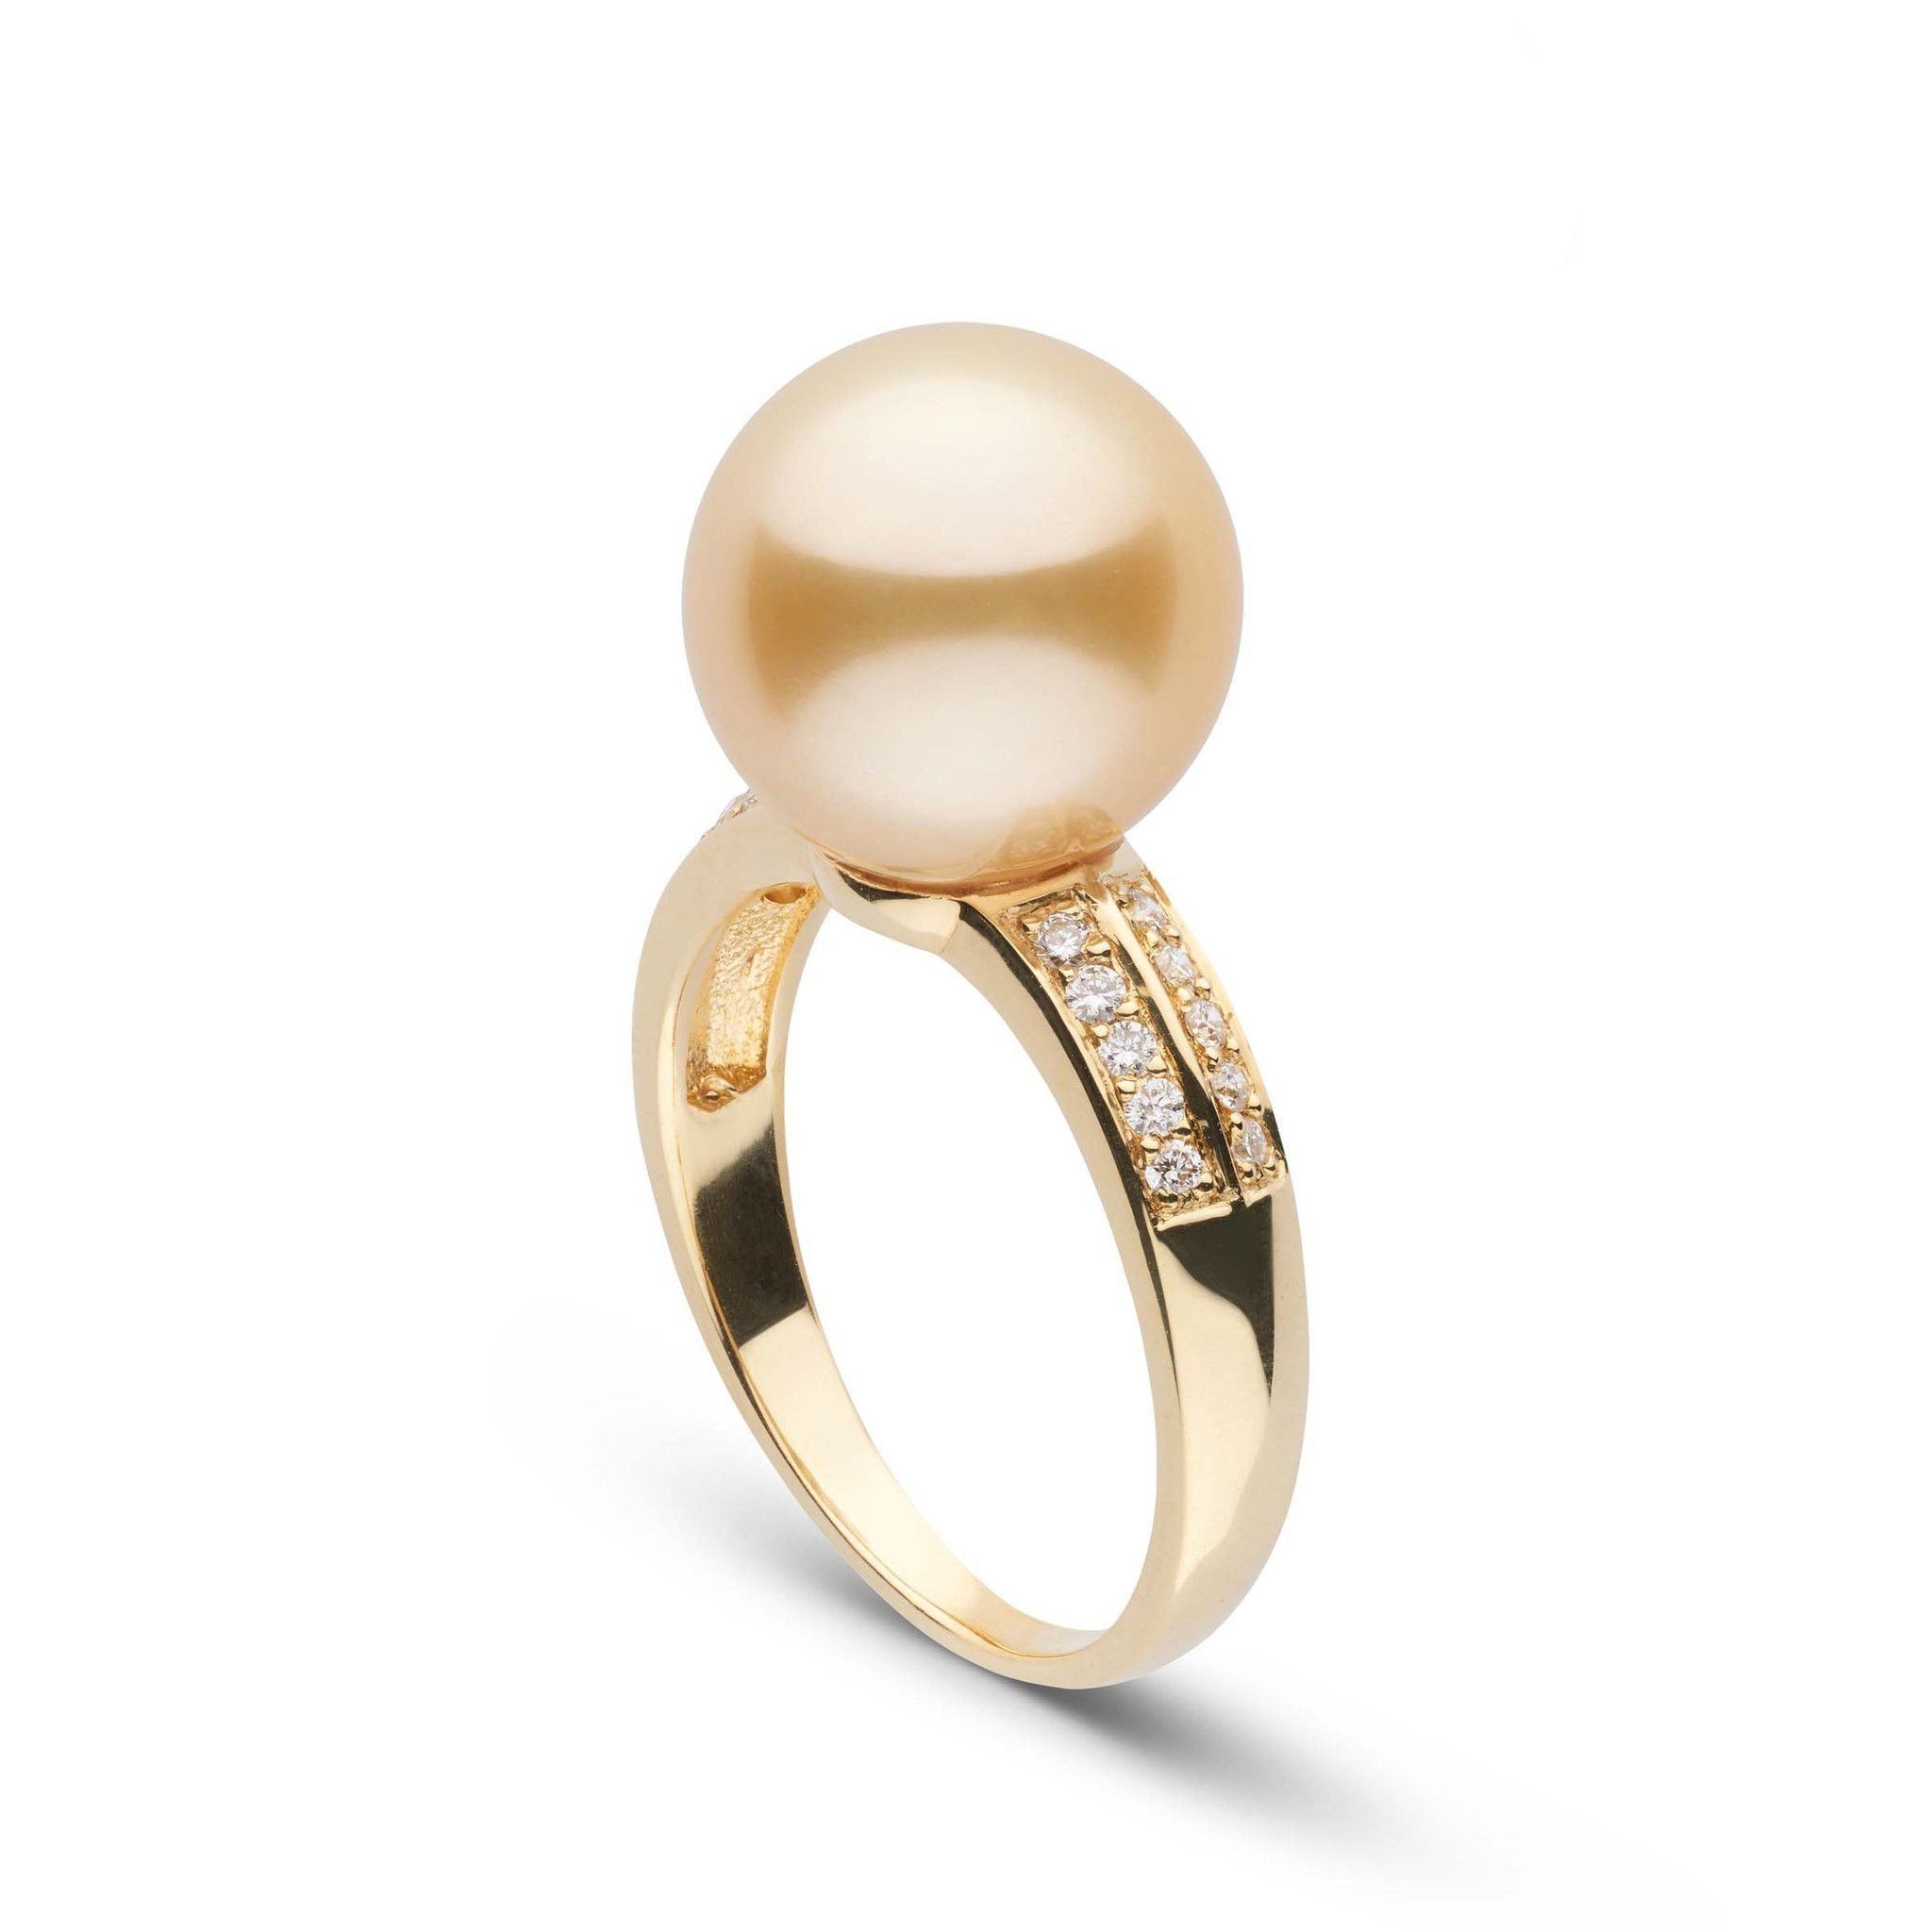 Forever Collection Golden 11.0-12.0 mm South Sea Pearl and Diamond Ring